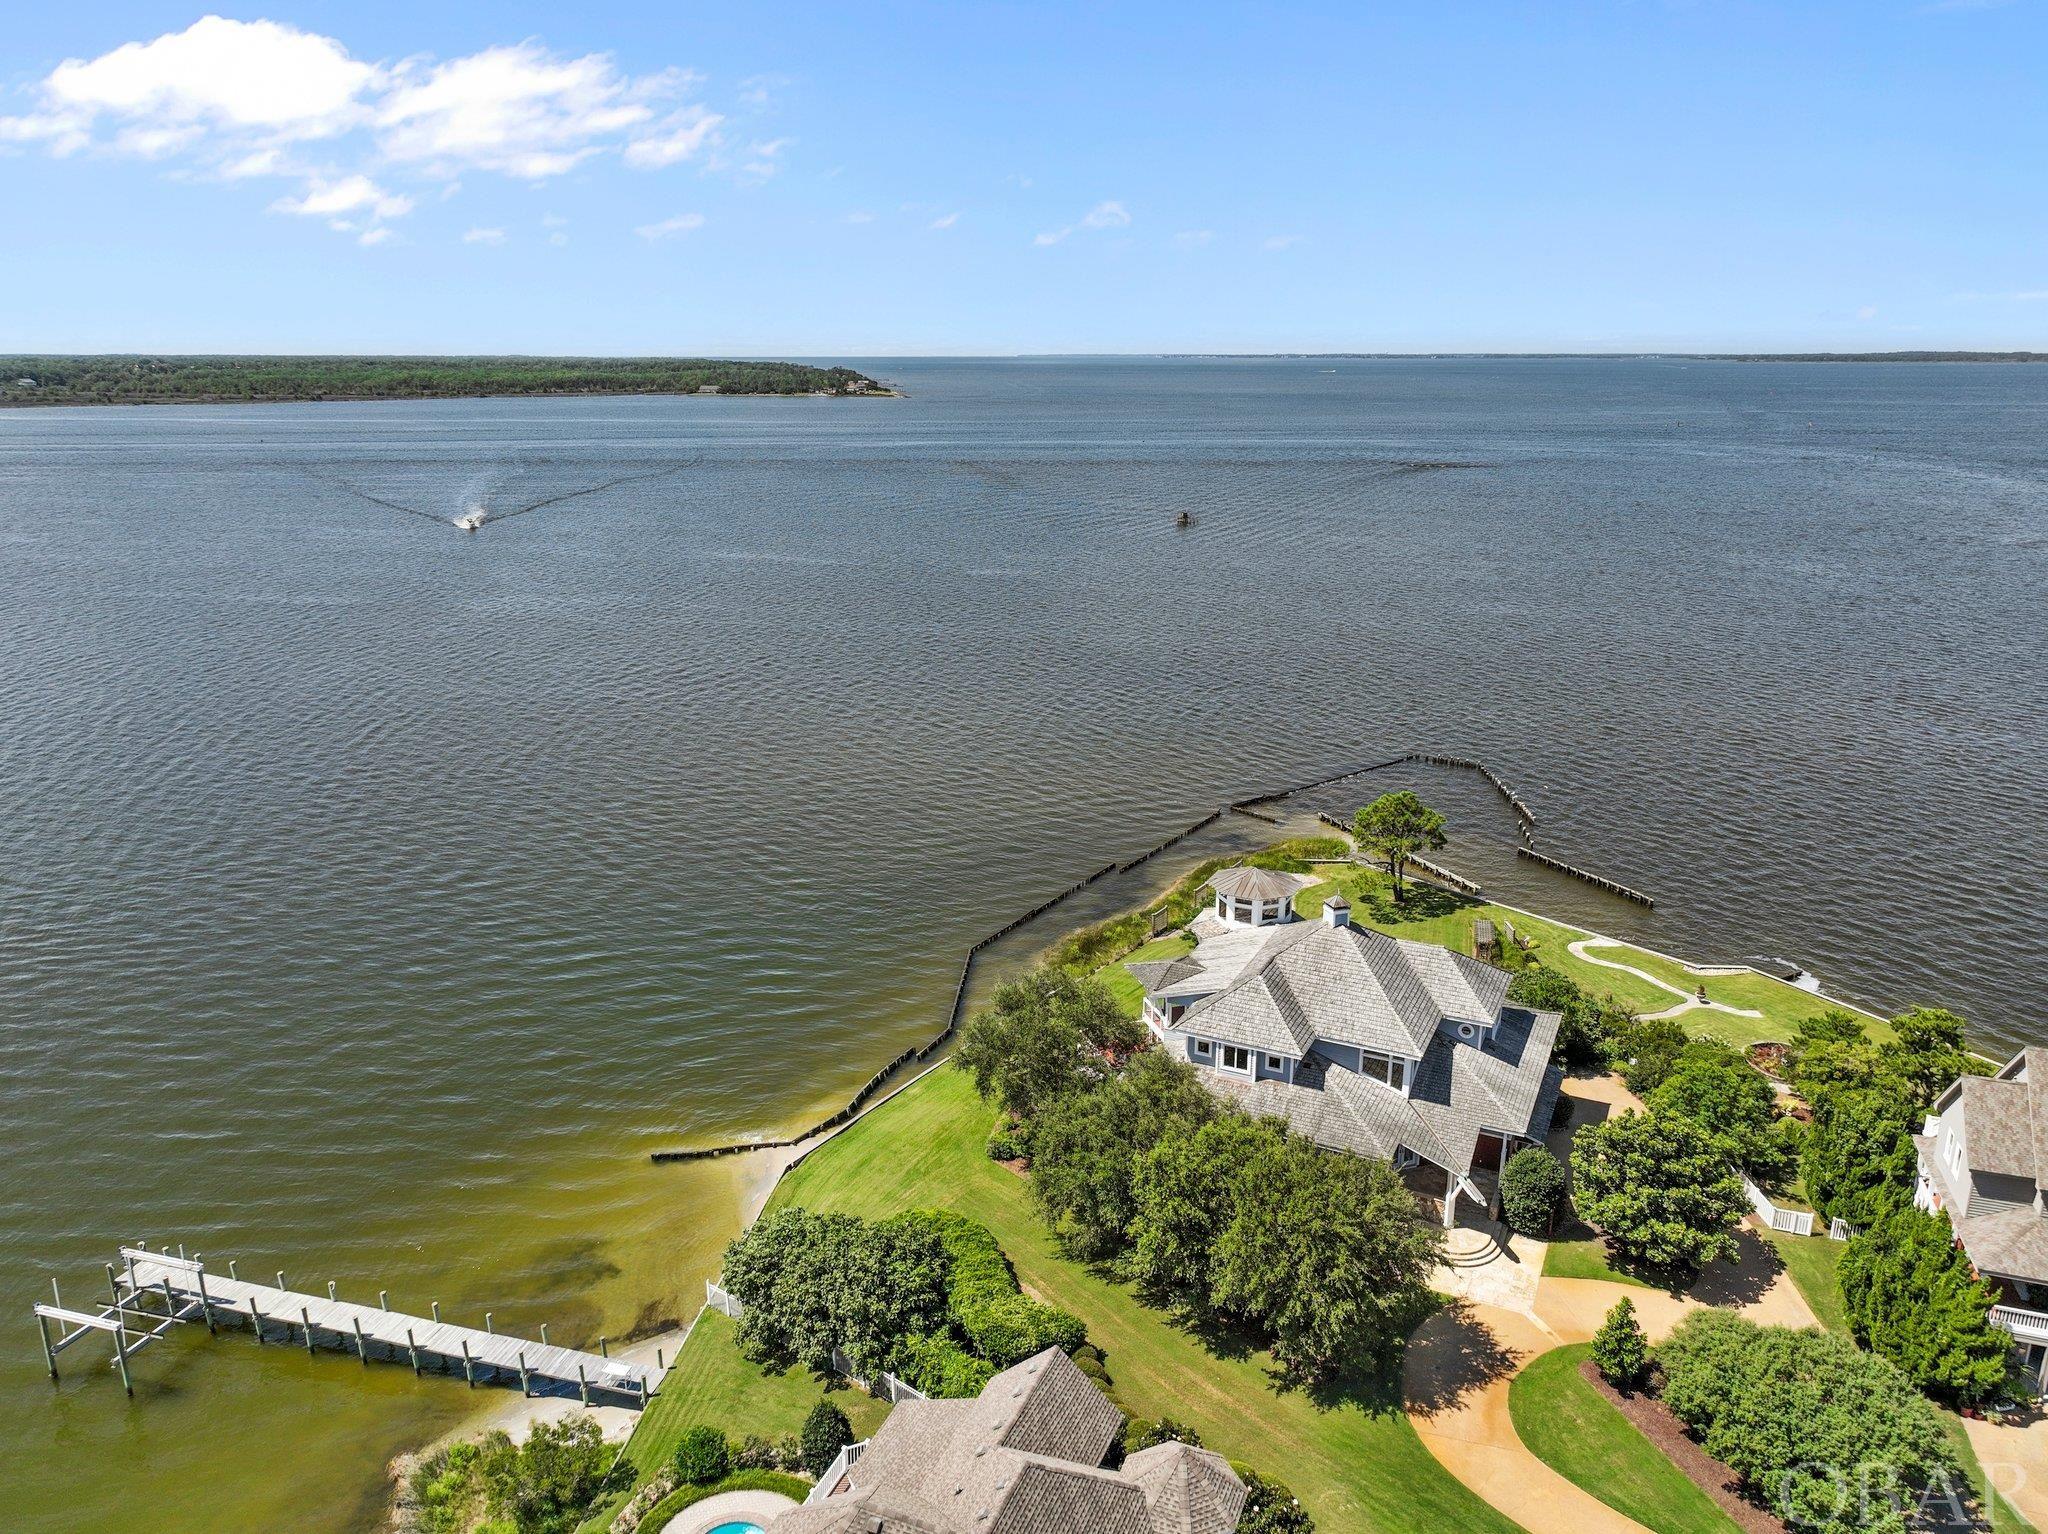 25 Ballast Point Drive, Manteo, NC 27954, 5 Bedrooms Bedrooms, ,4 BathroomsBathrooms,Residential,For Sale,Ballast Point Drive,120140